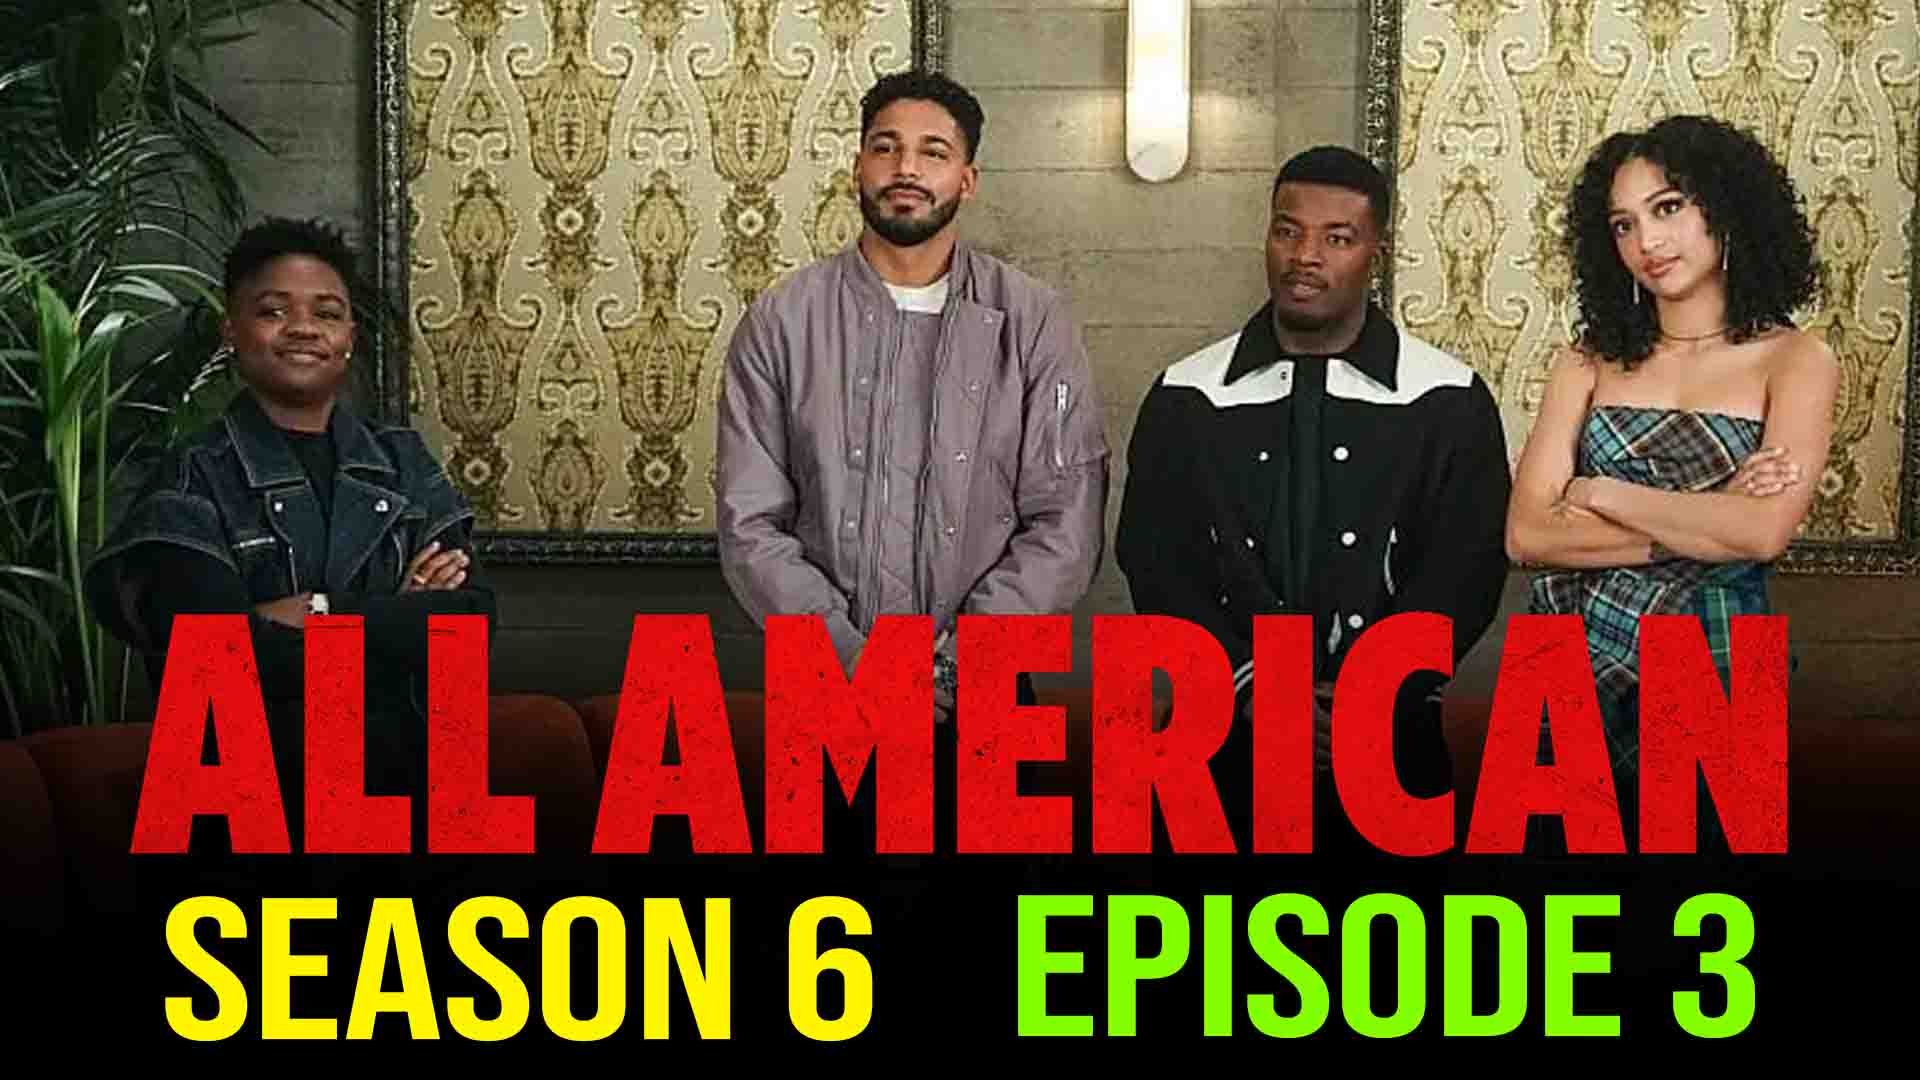 All American Season 6 Episode 3 “Business Is Business” Release